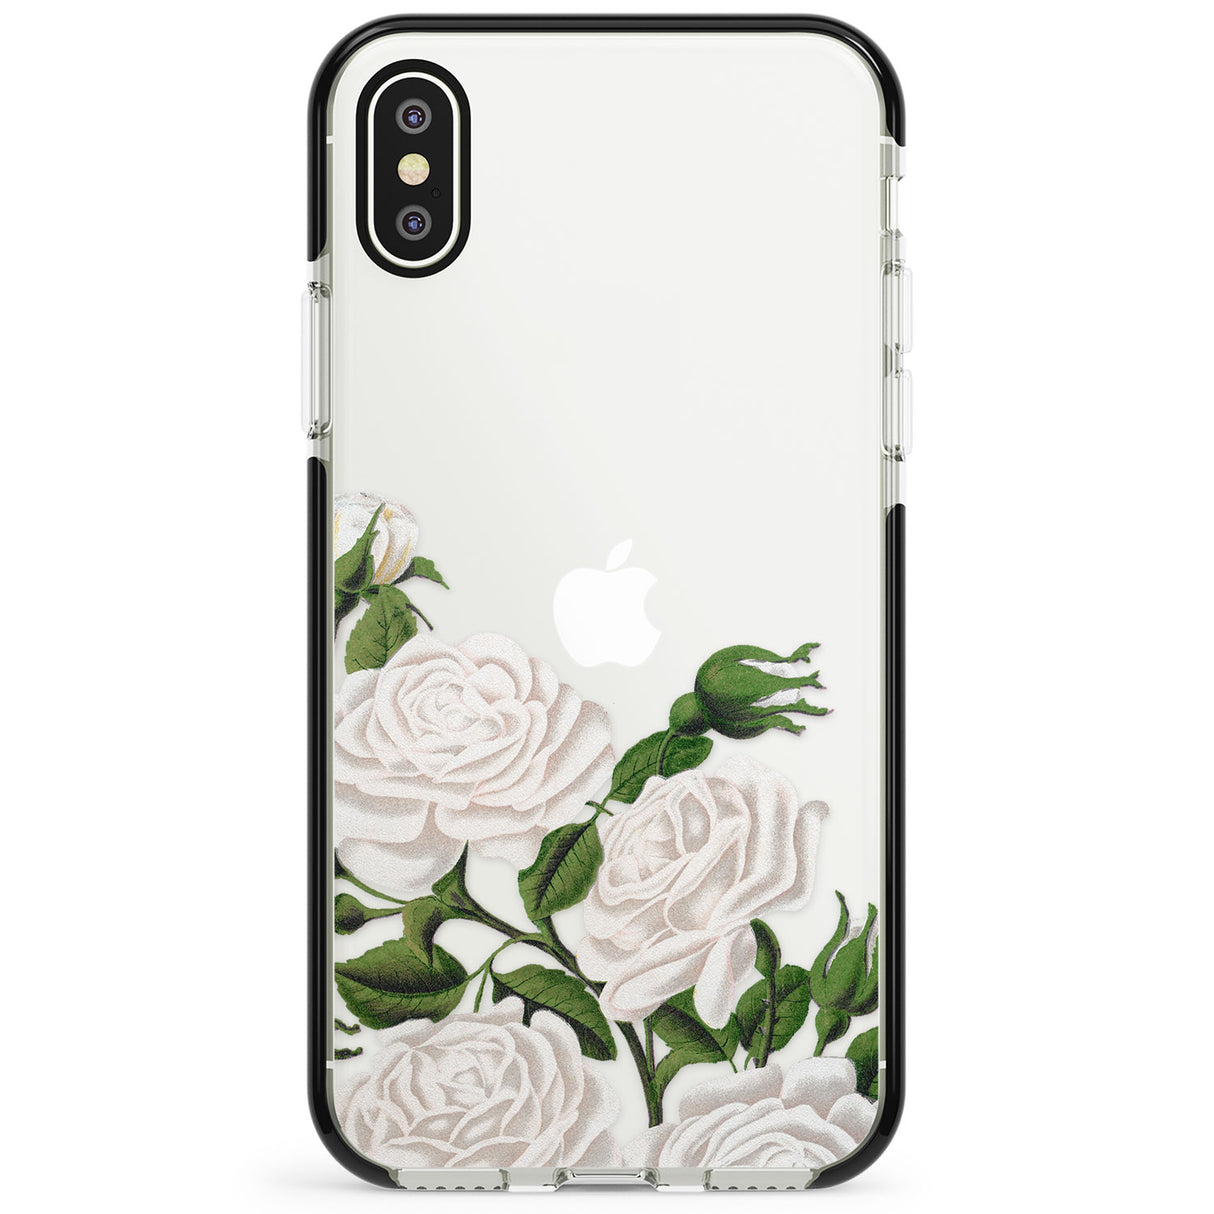 White Vintage Painted Flowers Phone Case for iPhone X XS Max XR